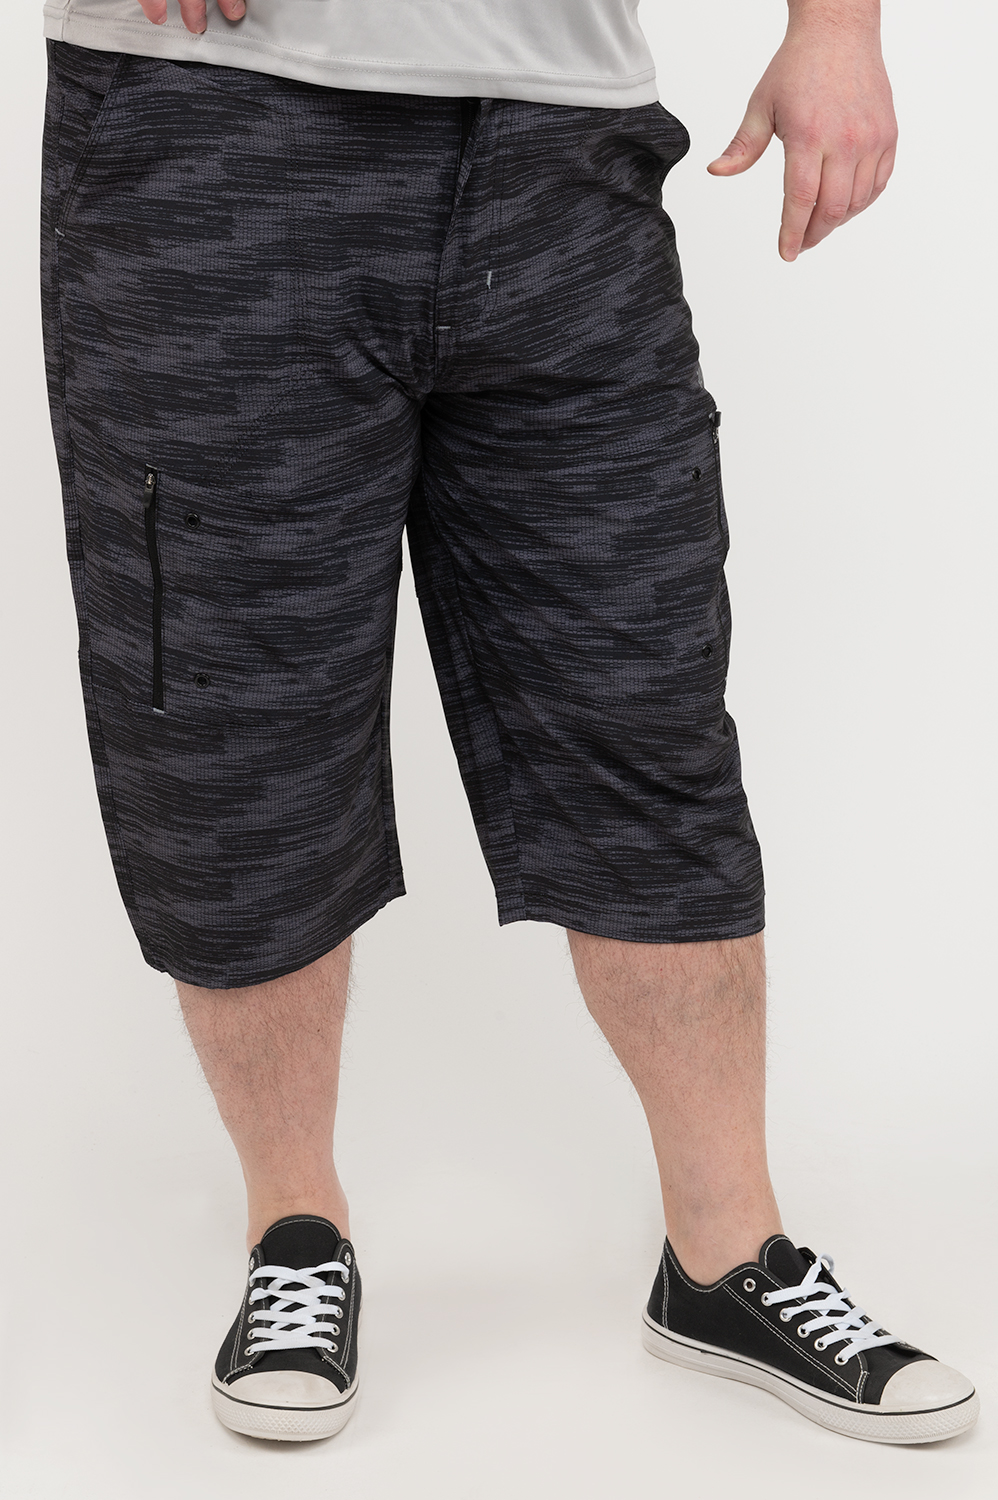 https://www.rossy.ca/media/A2W/products/capri-shorts-with-zippered-pockets-heathered-black-plus-size-73997-1.jpg